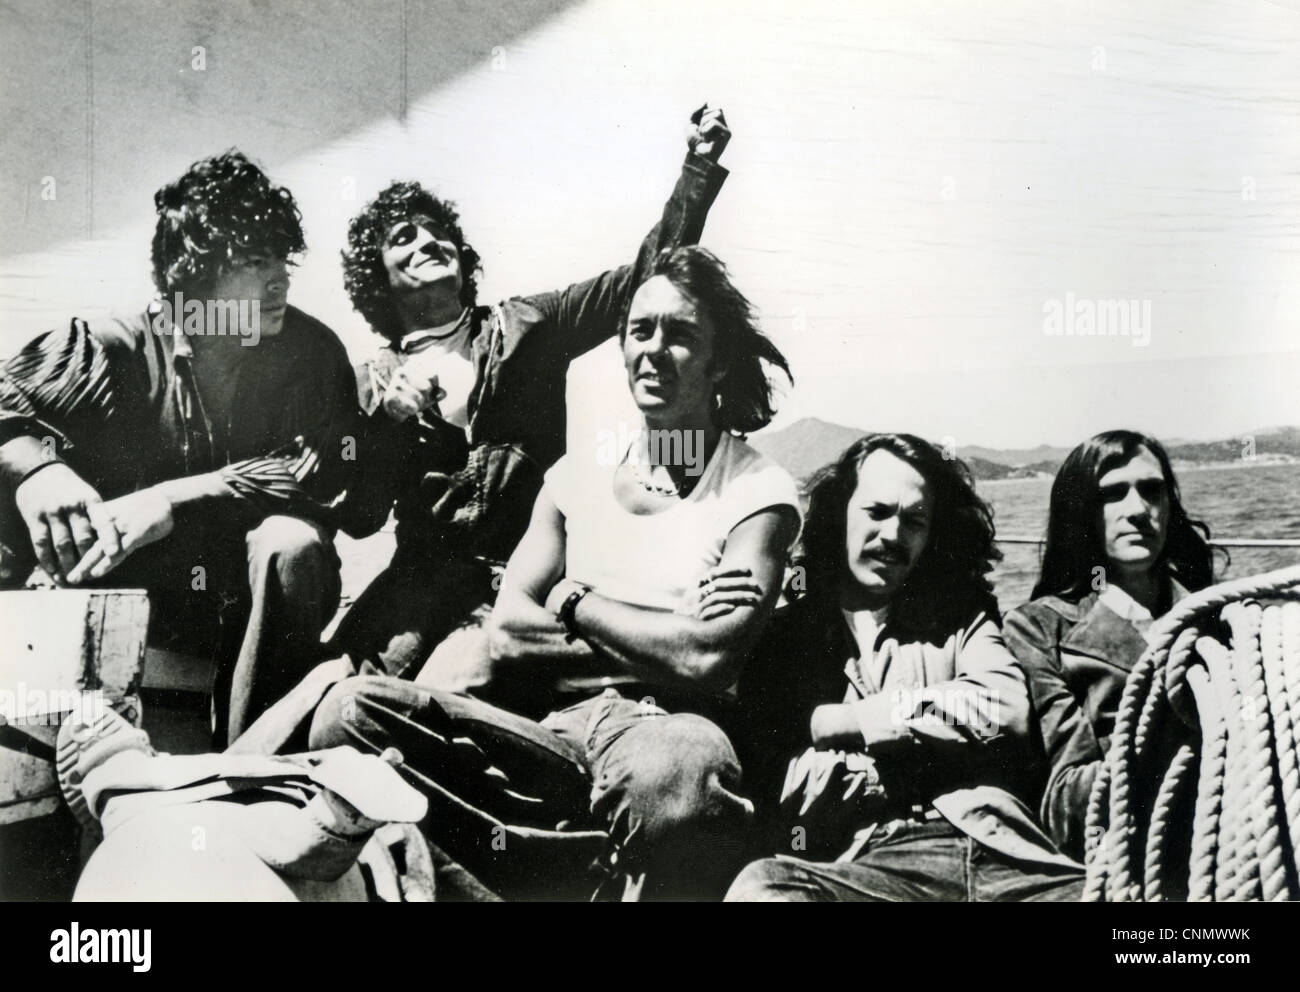 QUICKSILVER MESSENGER SERVICE Promotional photo of US rock group about 1971 with Dino Valenti at left Stock Photo